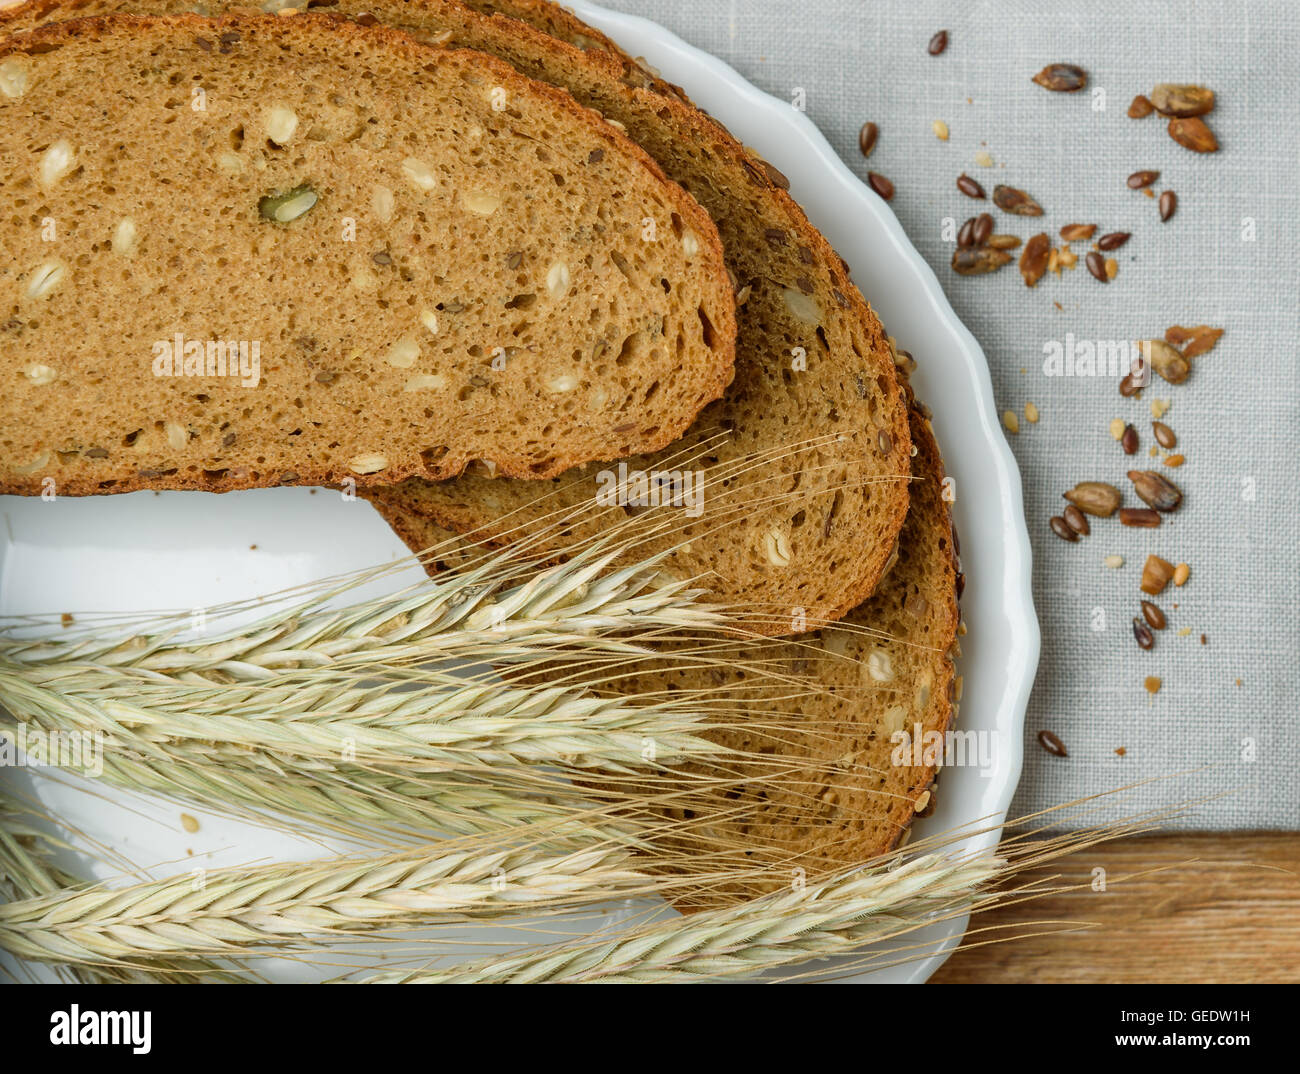 Fresh crusty bread on the plate and wheat ears on a wooden table Stock Photo